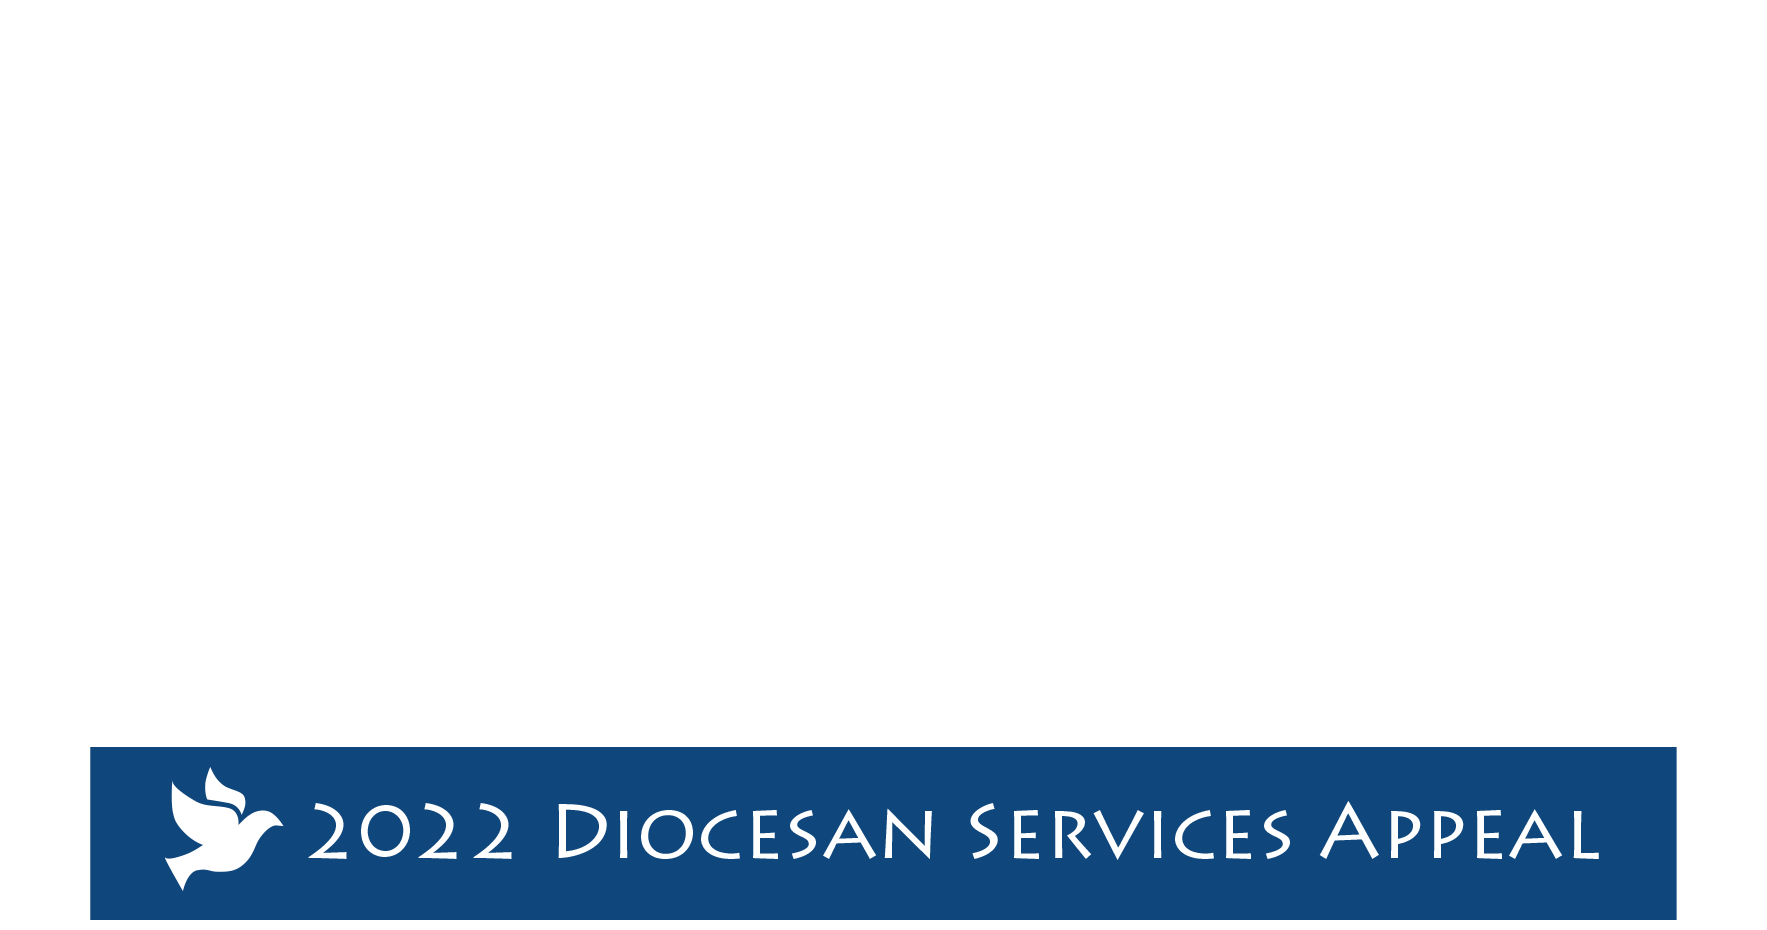 Diocesan Services Appeal 2022